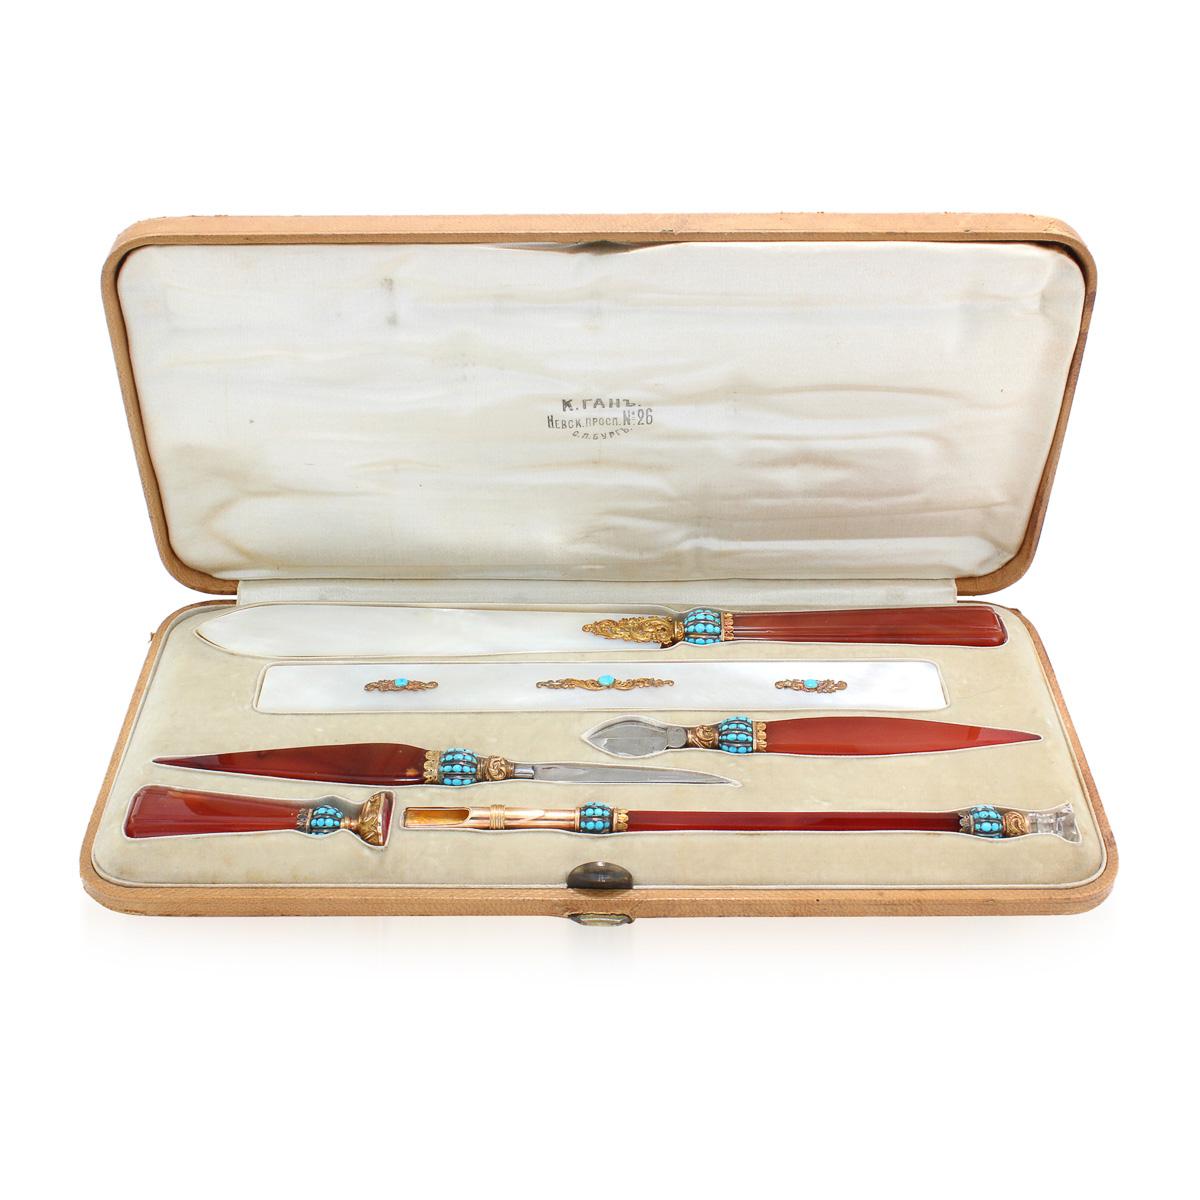 19th century Imperial Russian gold, carnelian, turquoise and mother of pearl desk set, comprising various writing instruments, beautifully decorated with stylised scrolling foliage and fitted in the original retail case.
Retailers mark in Cyrillic